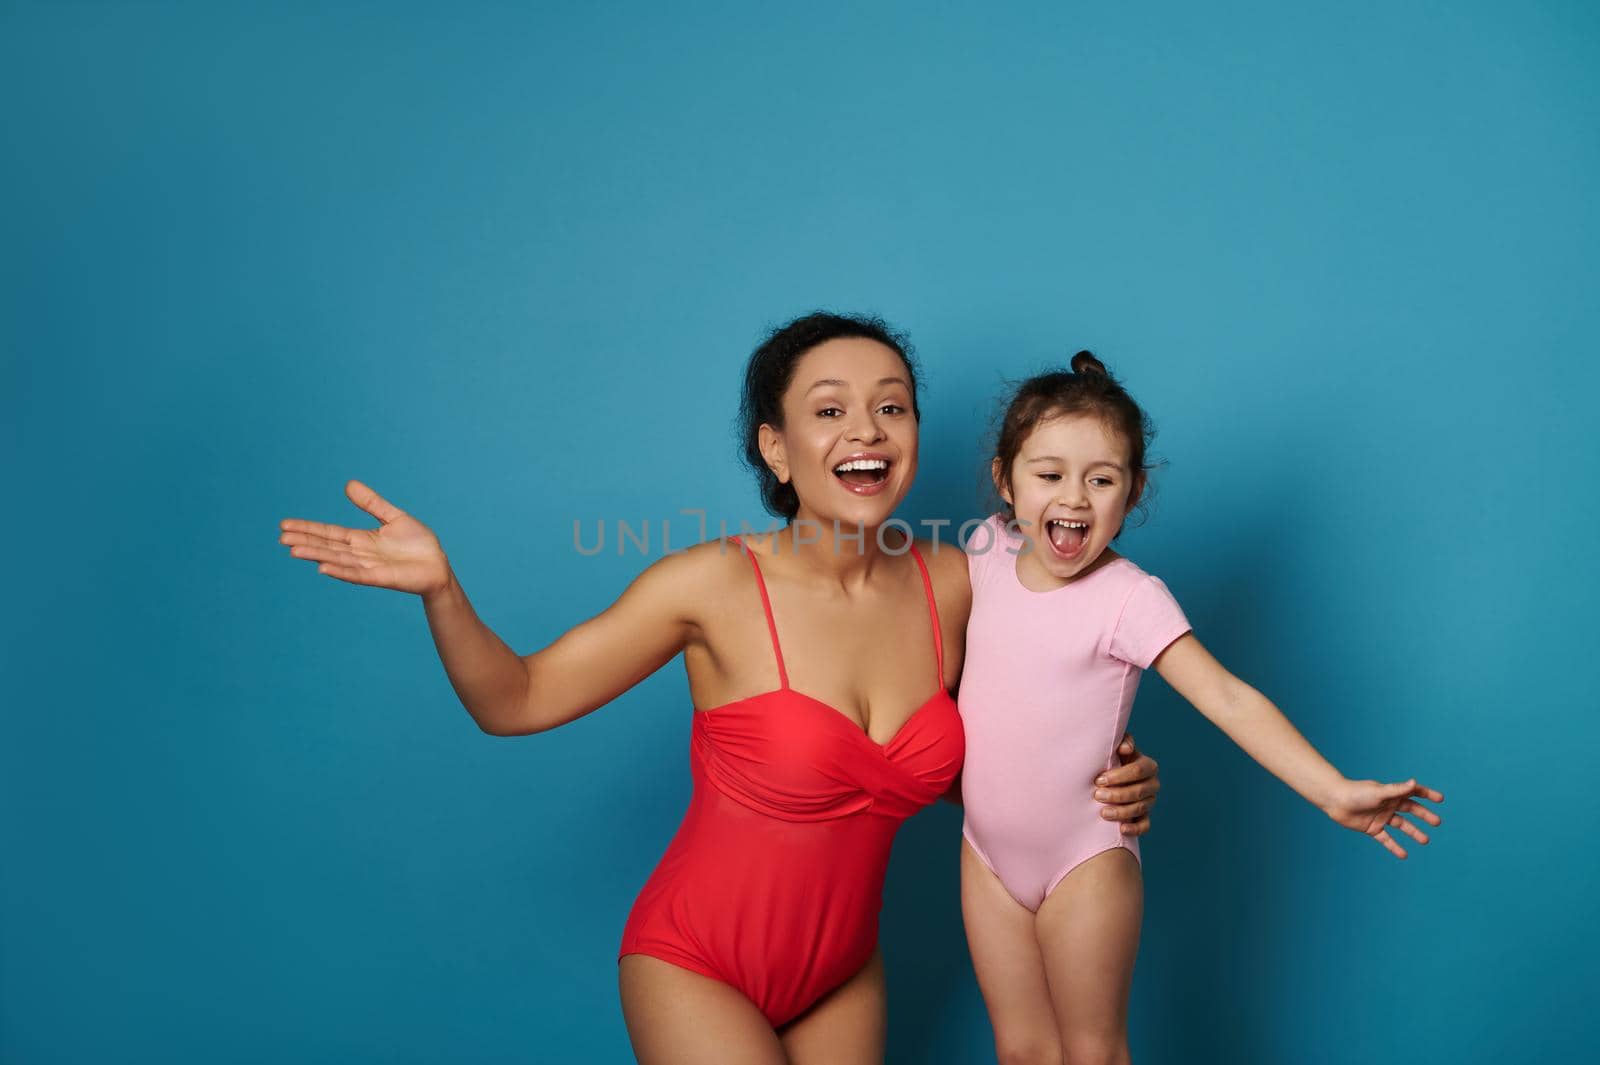 Mom and daughter in swimsuits smiling while posing over blue background with space for text